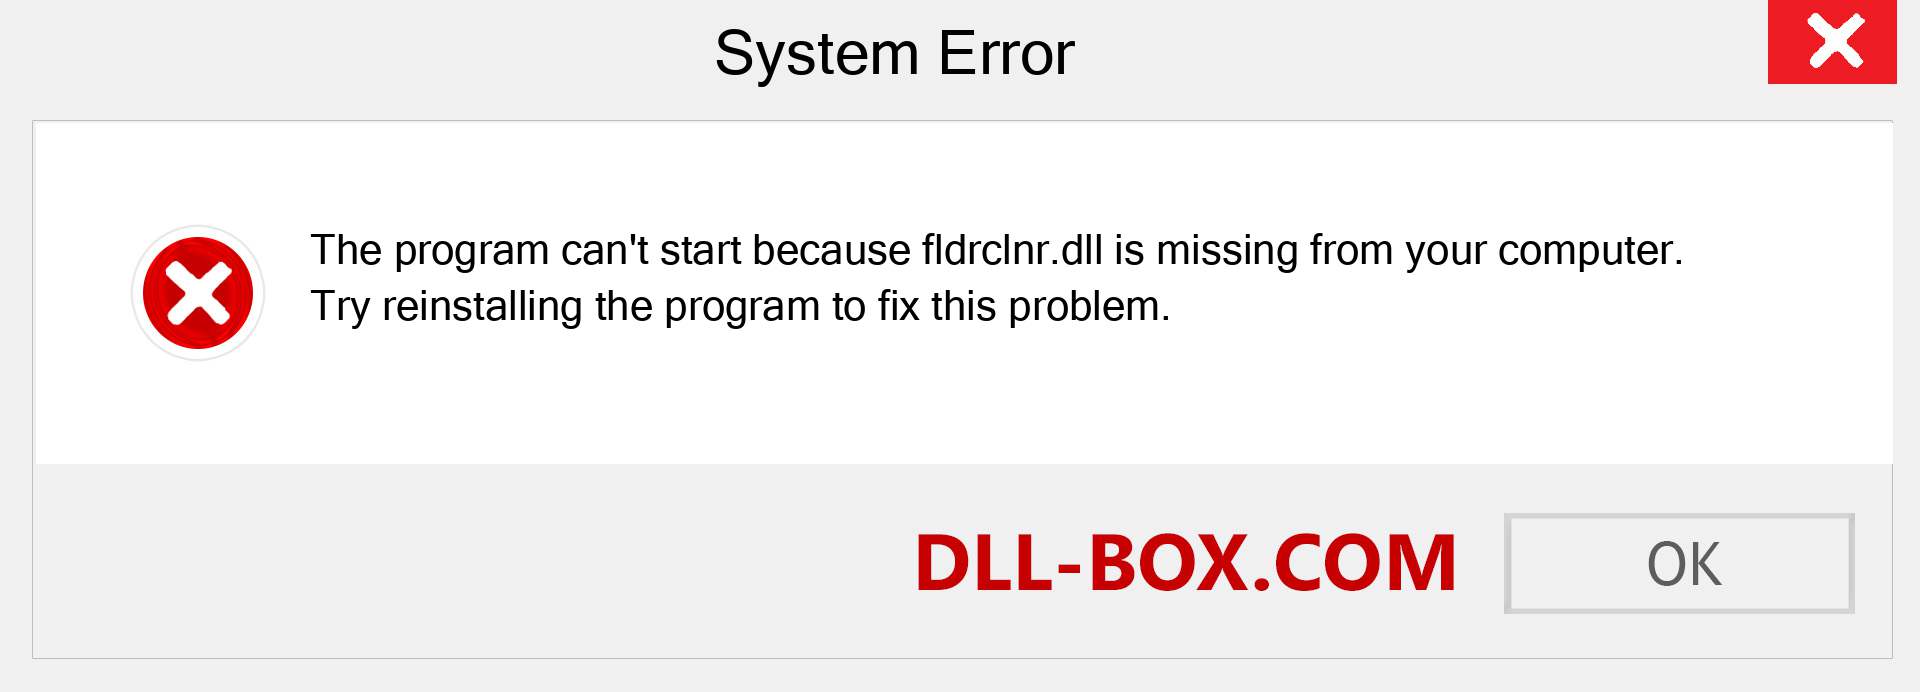  fldrclnr.dll file is missing?. Download for Windows 7, 8, 10 - Fix  fldrclnr dll Missing Error on Windows, photos, images